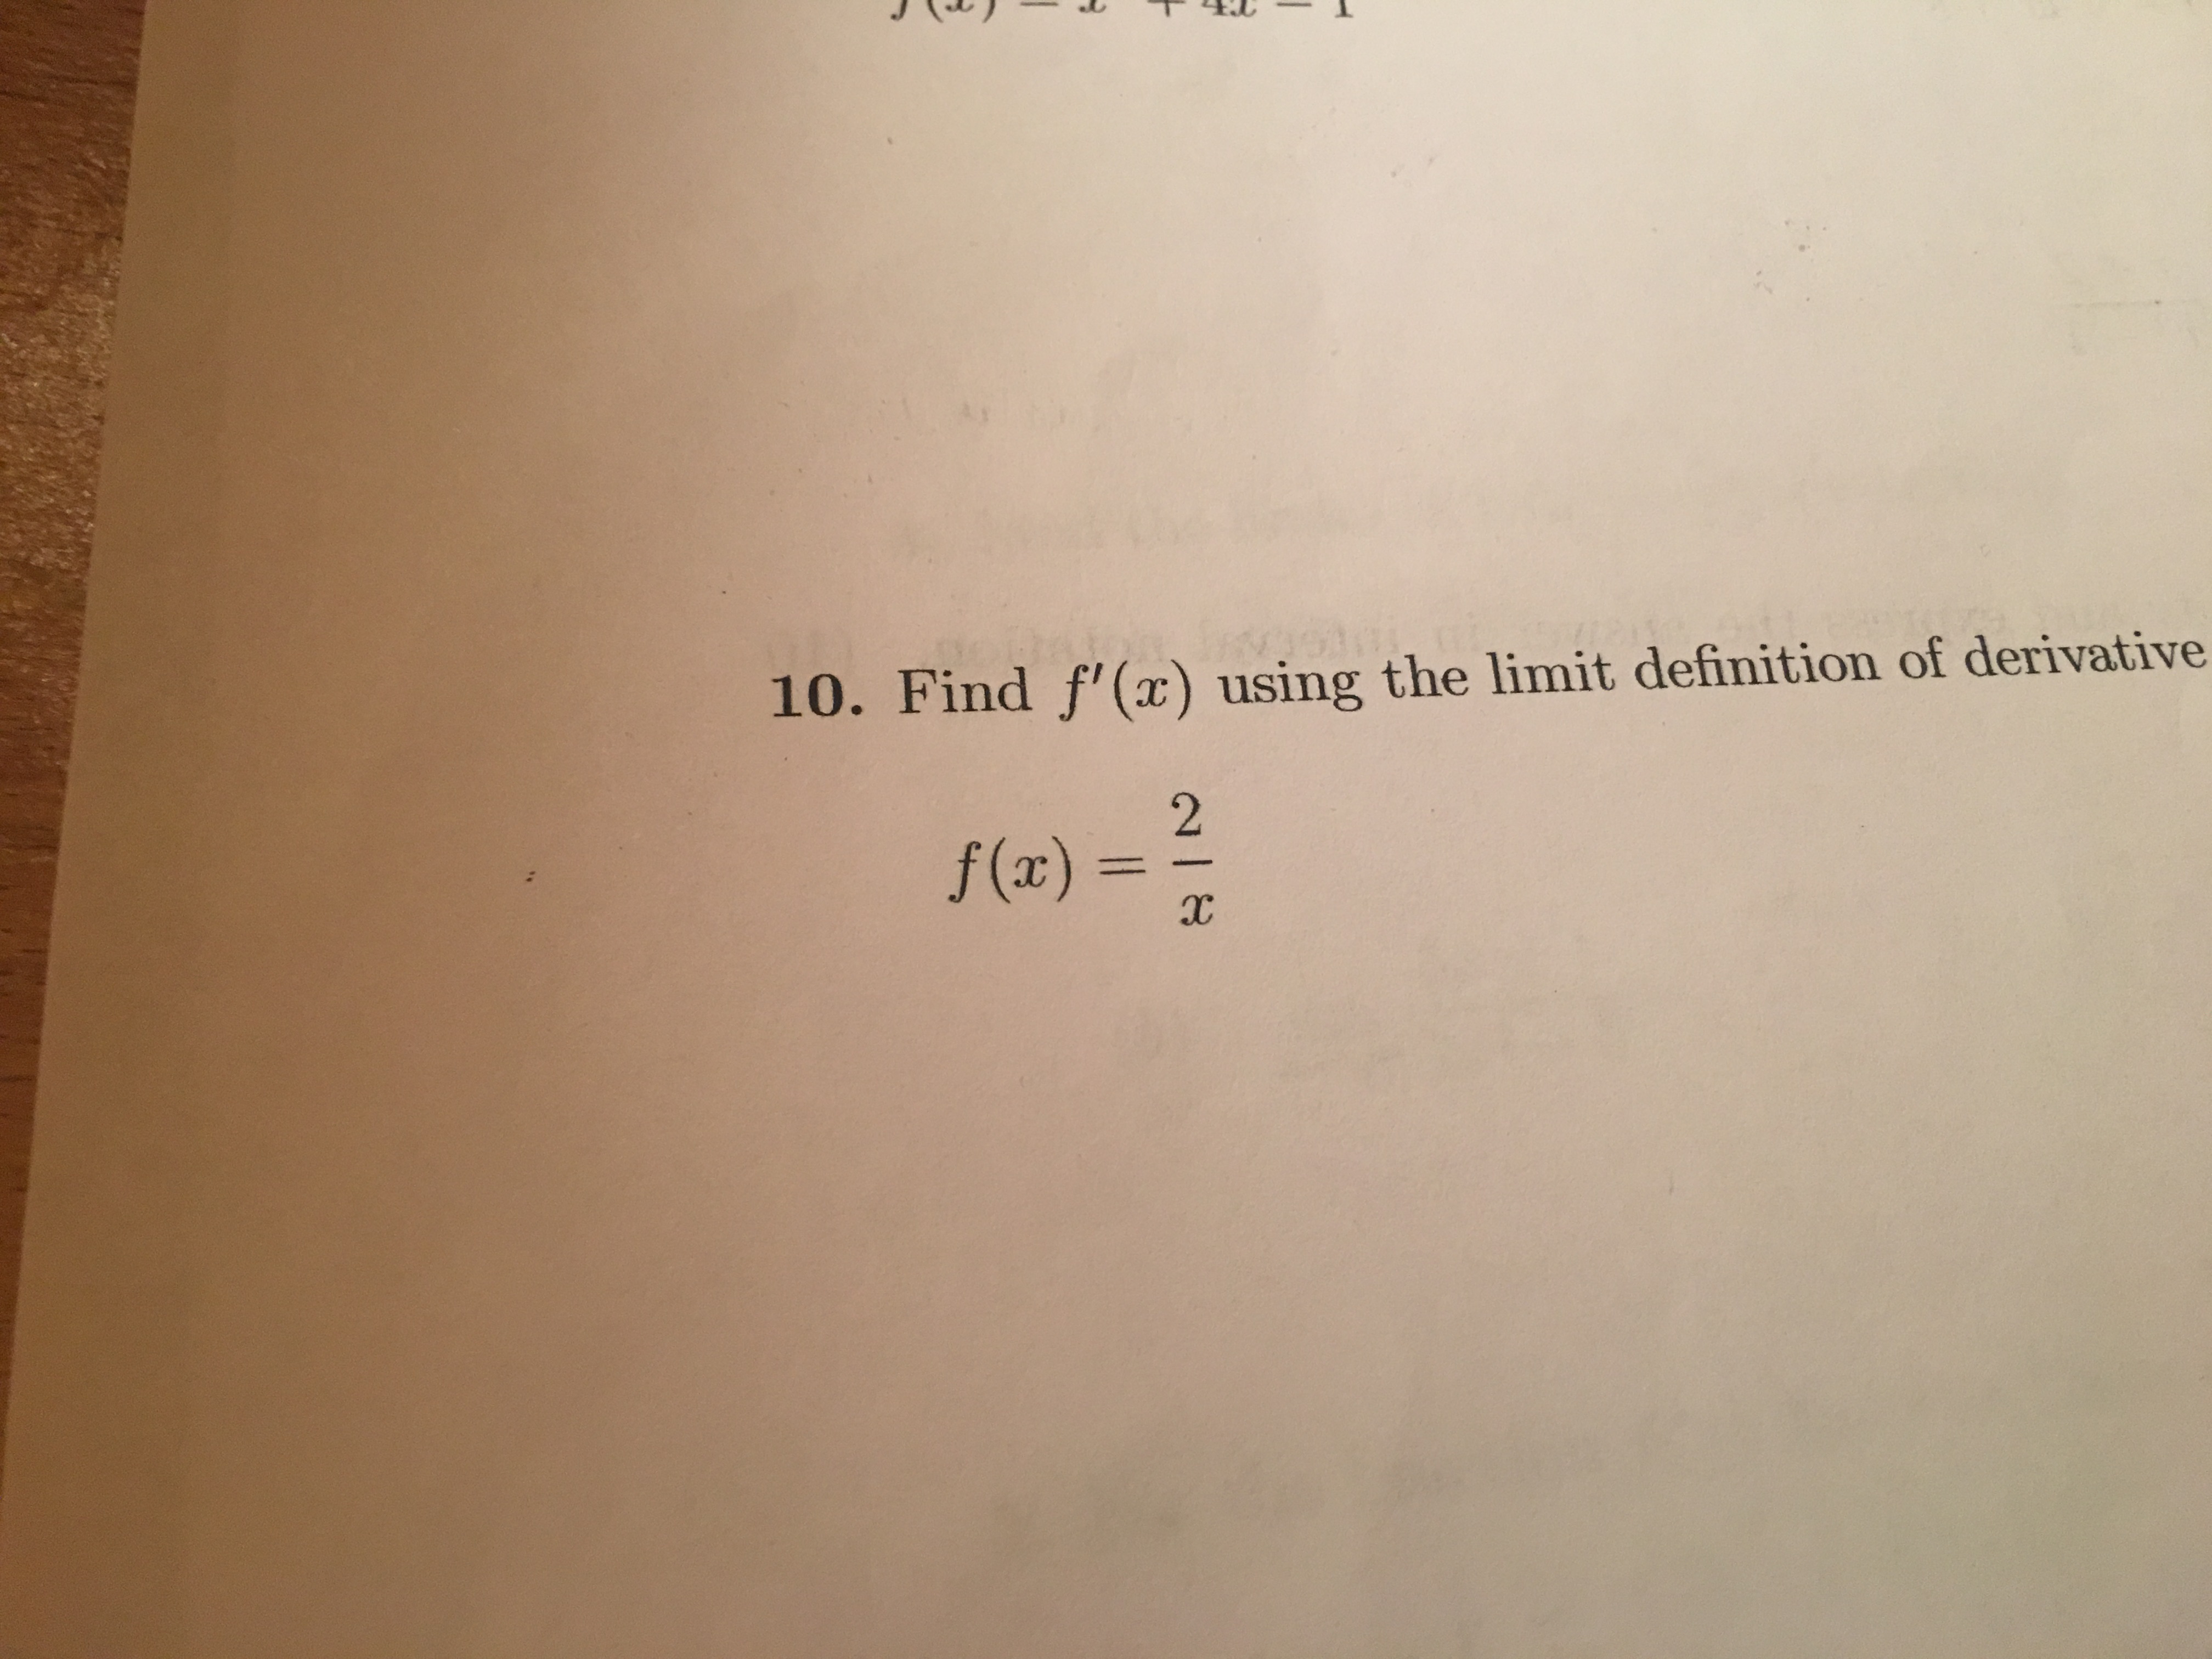 10. Find f'(z) using the limit definition of derivative
